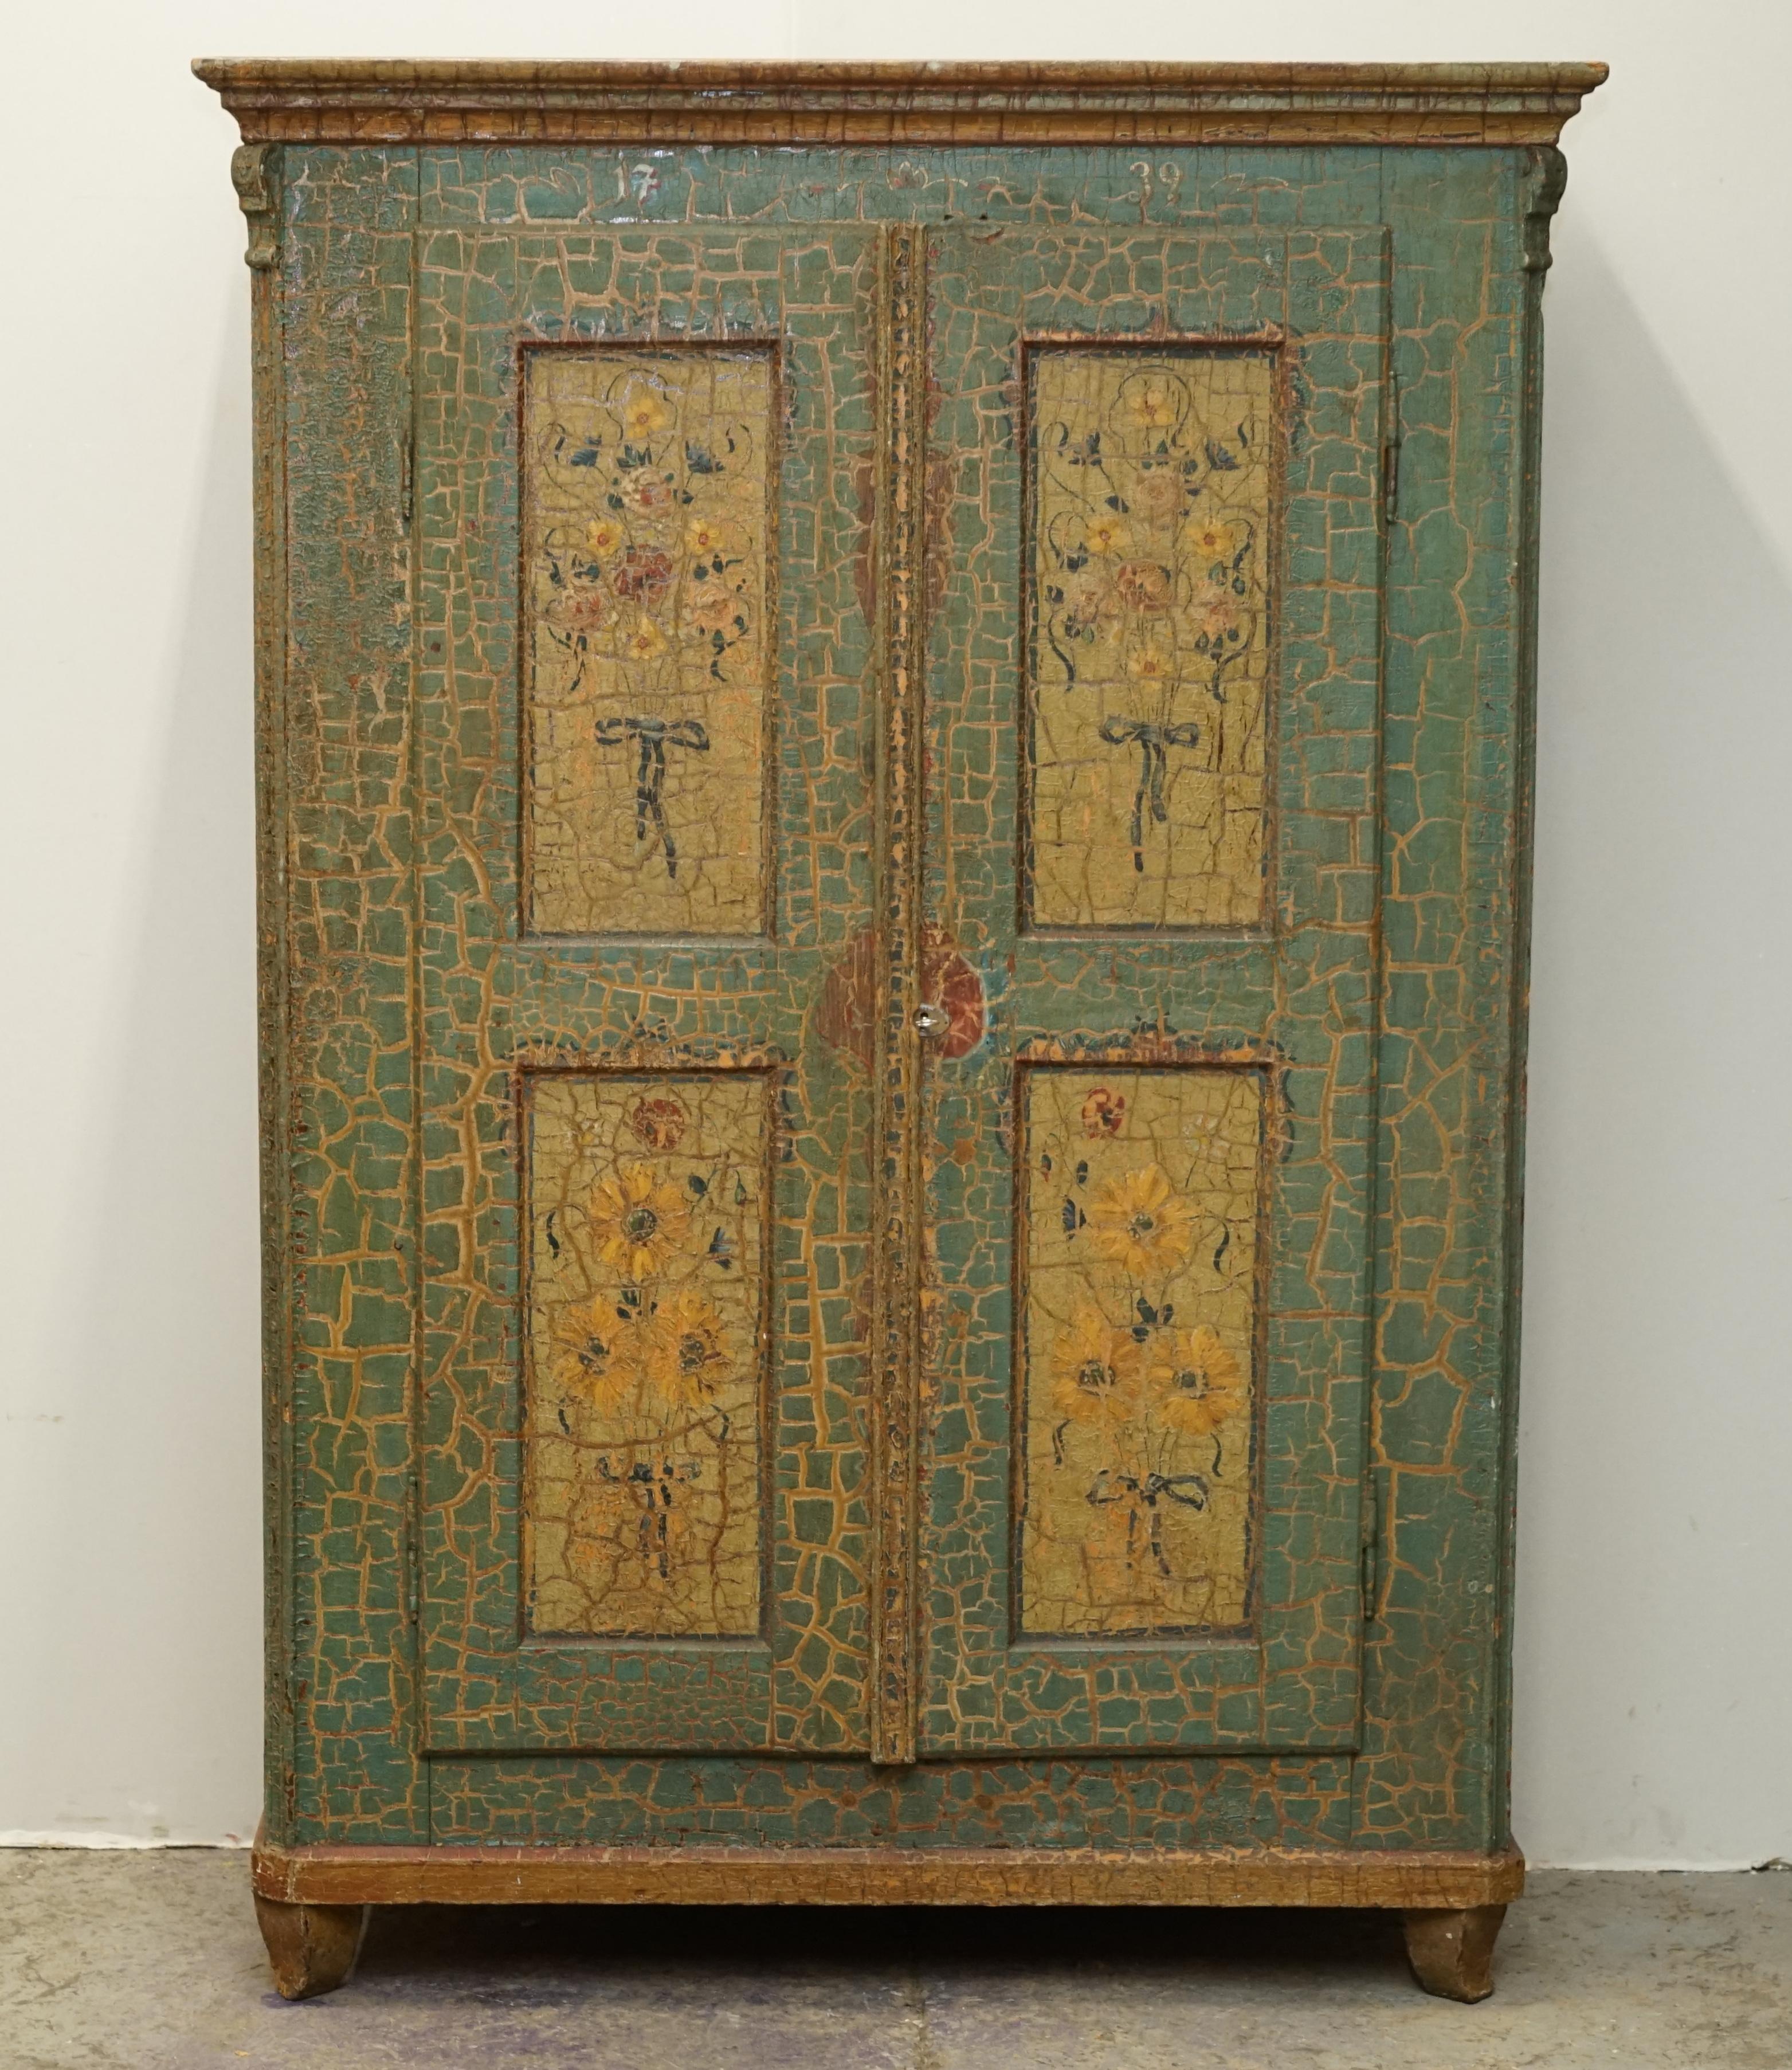 We are delighted to offer for sale this stunning original 1738 dated Antique German Marriage wardrobe / Folded linen cupboard in the oldest and most original paint I have ever seen

I have recently purchased a very large collection of these